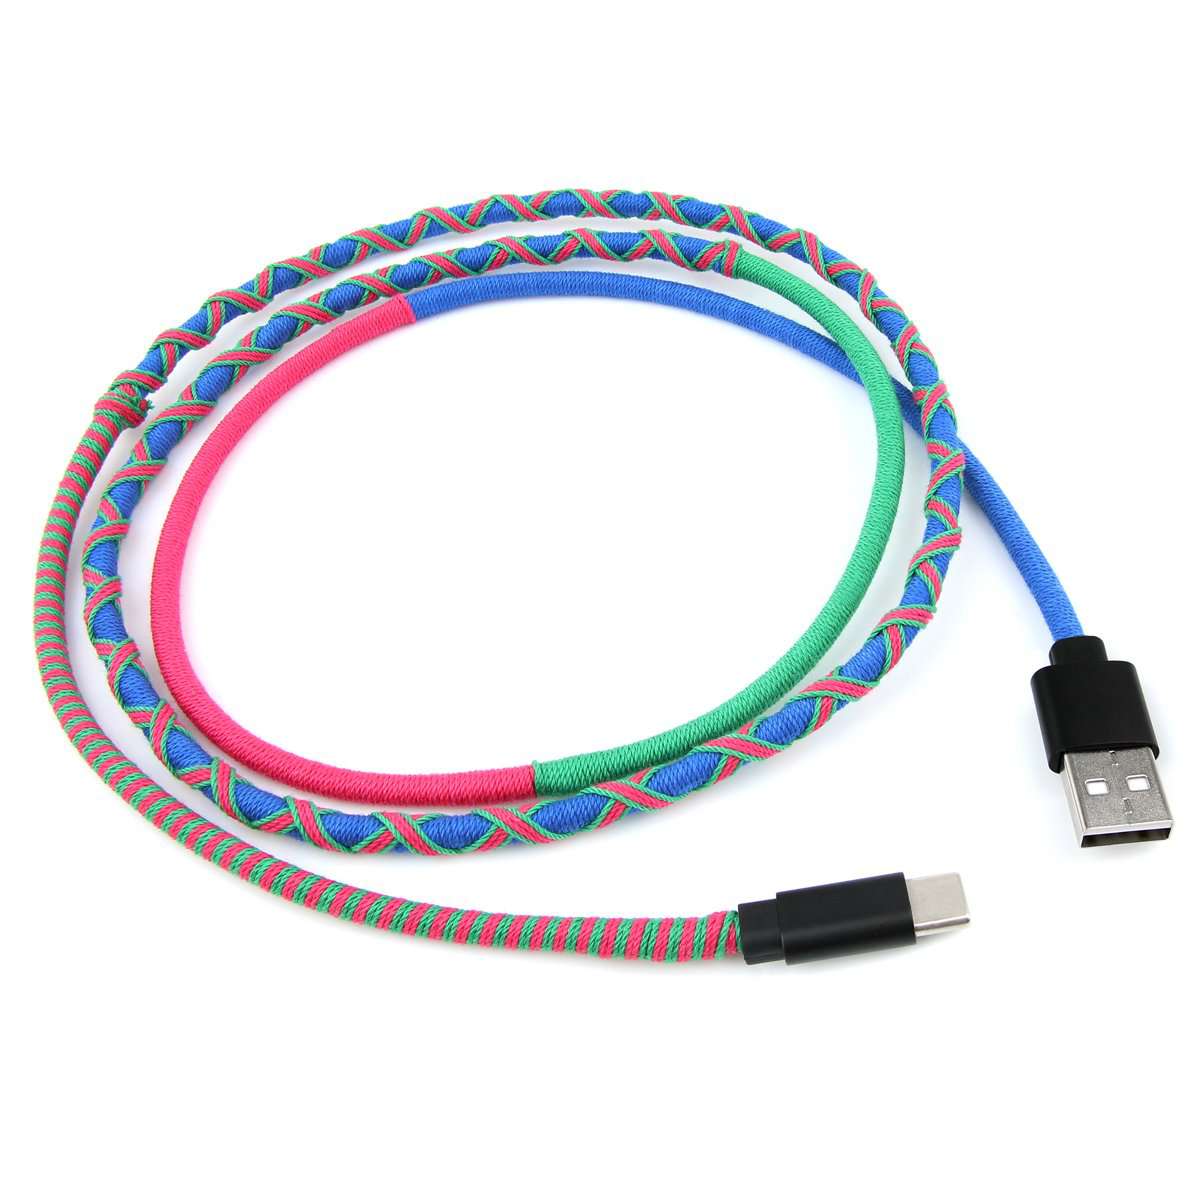 Type C Fast Charging Cable - Blue & Pink